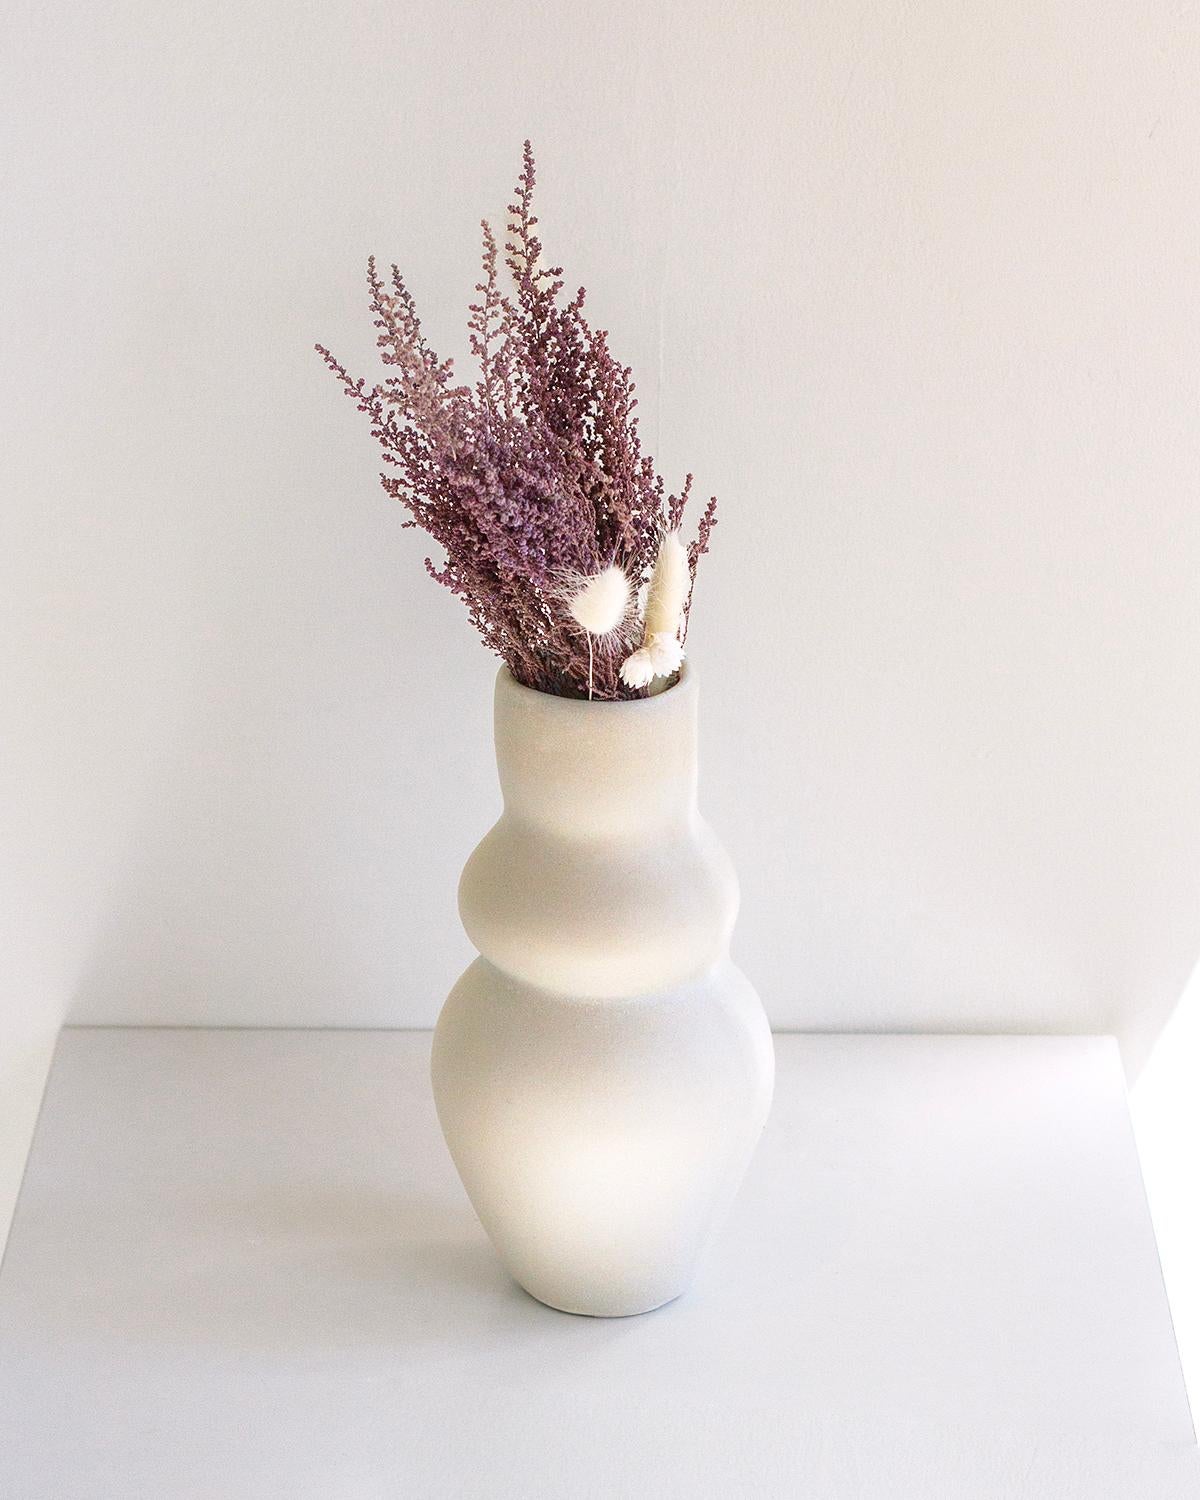 This handmade Goddess Clay Vase is a perfect addition to any home décor. It is crafted from white clay with a minimalist design that makes it both unique and modern. Its delicate texture is perfect for arranging flowers and branches and it makes an